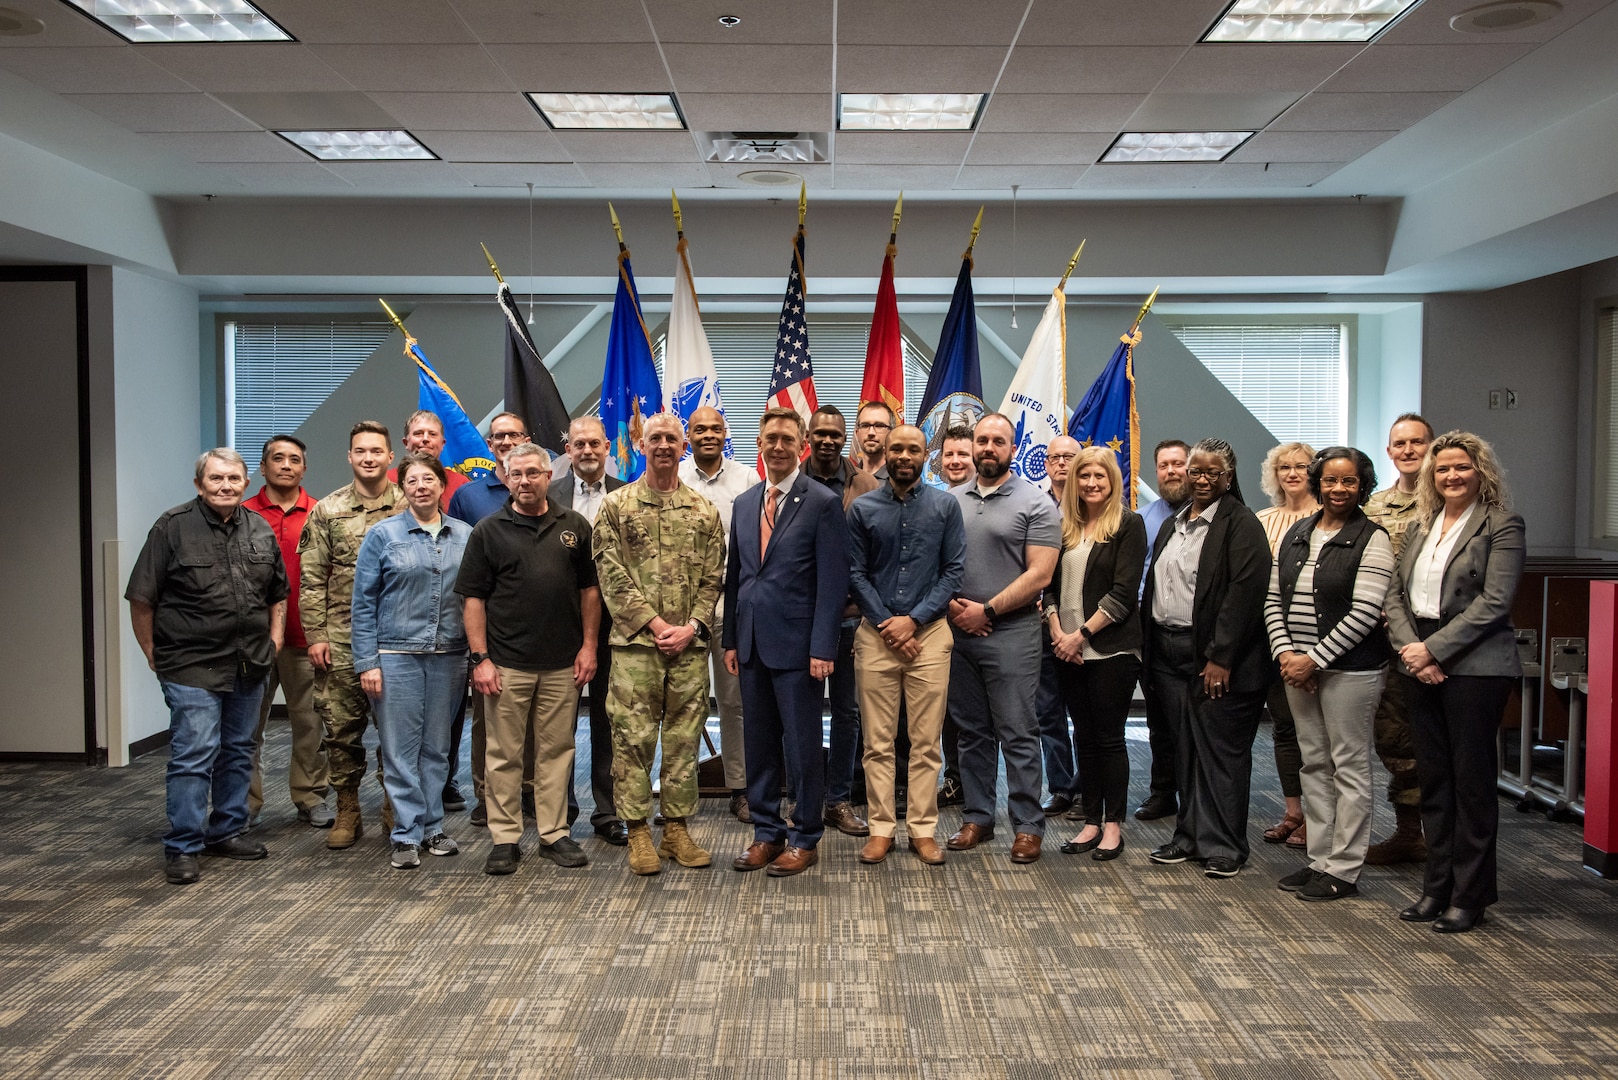 Twenty-four smiling people with a mix of military and civilian. The military are wearing camoflage OCPs and the civilians are wearing a varying combination of business casual and casual.  There are men and women in the photo. They are standing in front of an array of military flags inside a conference room with white walls and grey carpet.